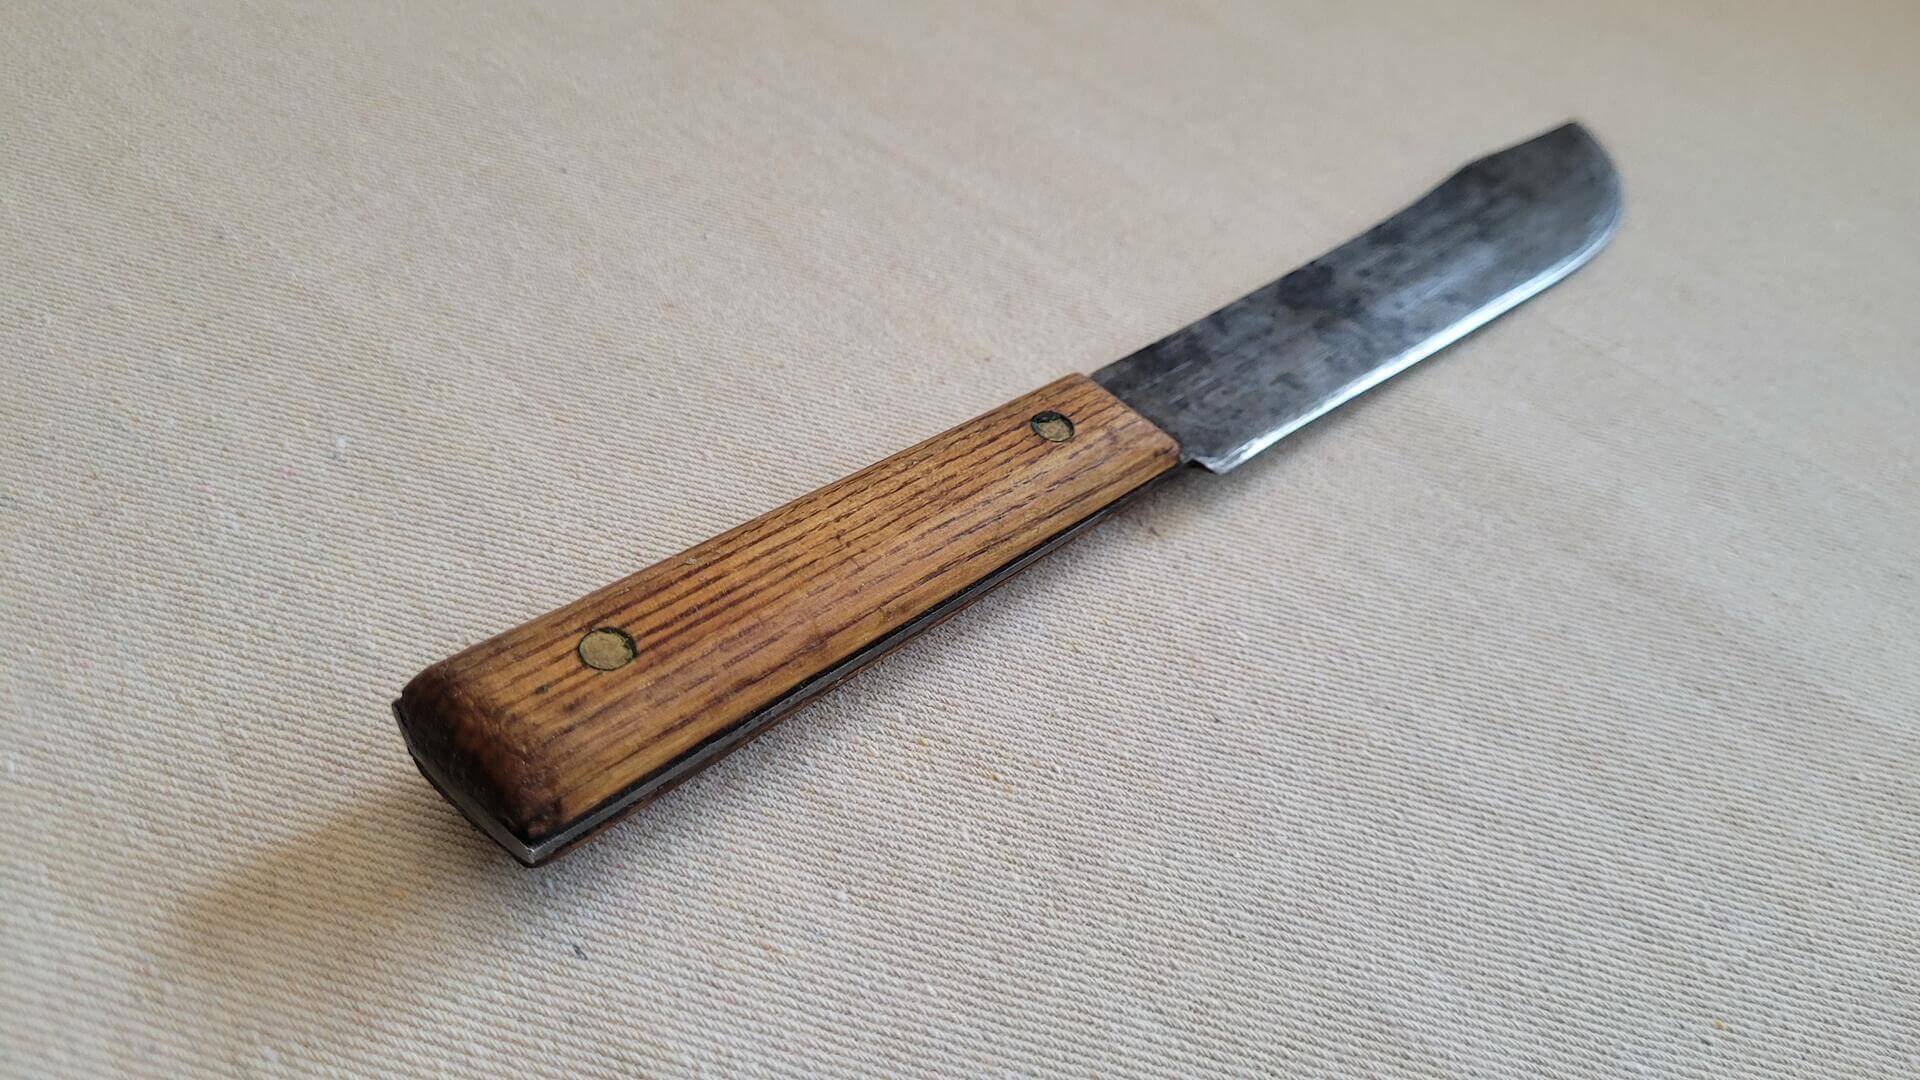 Beautiful vintage Forgecraft Hi-Carbon steel kitchen knife with hickory wood handle and brass rivets. Mid century made in USA collectible chef and butcher knives and cutlery